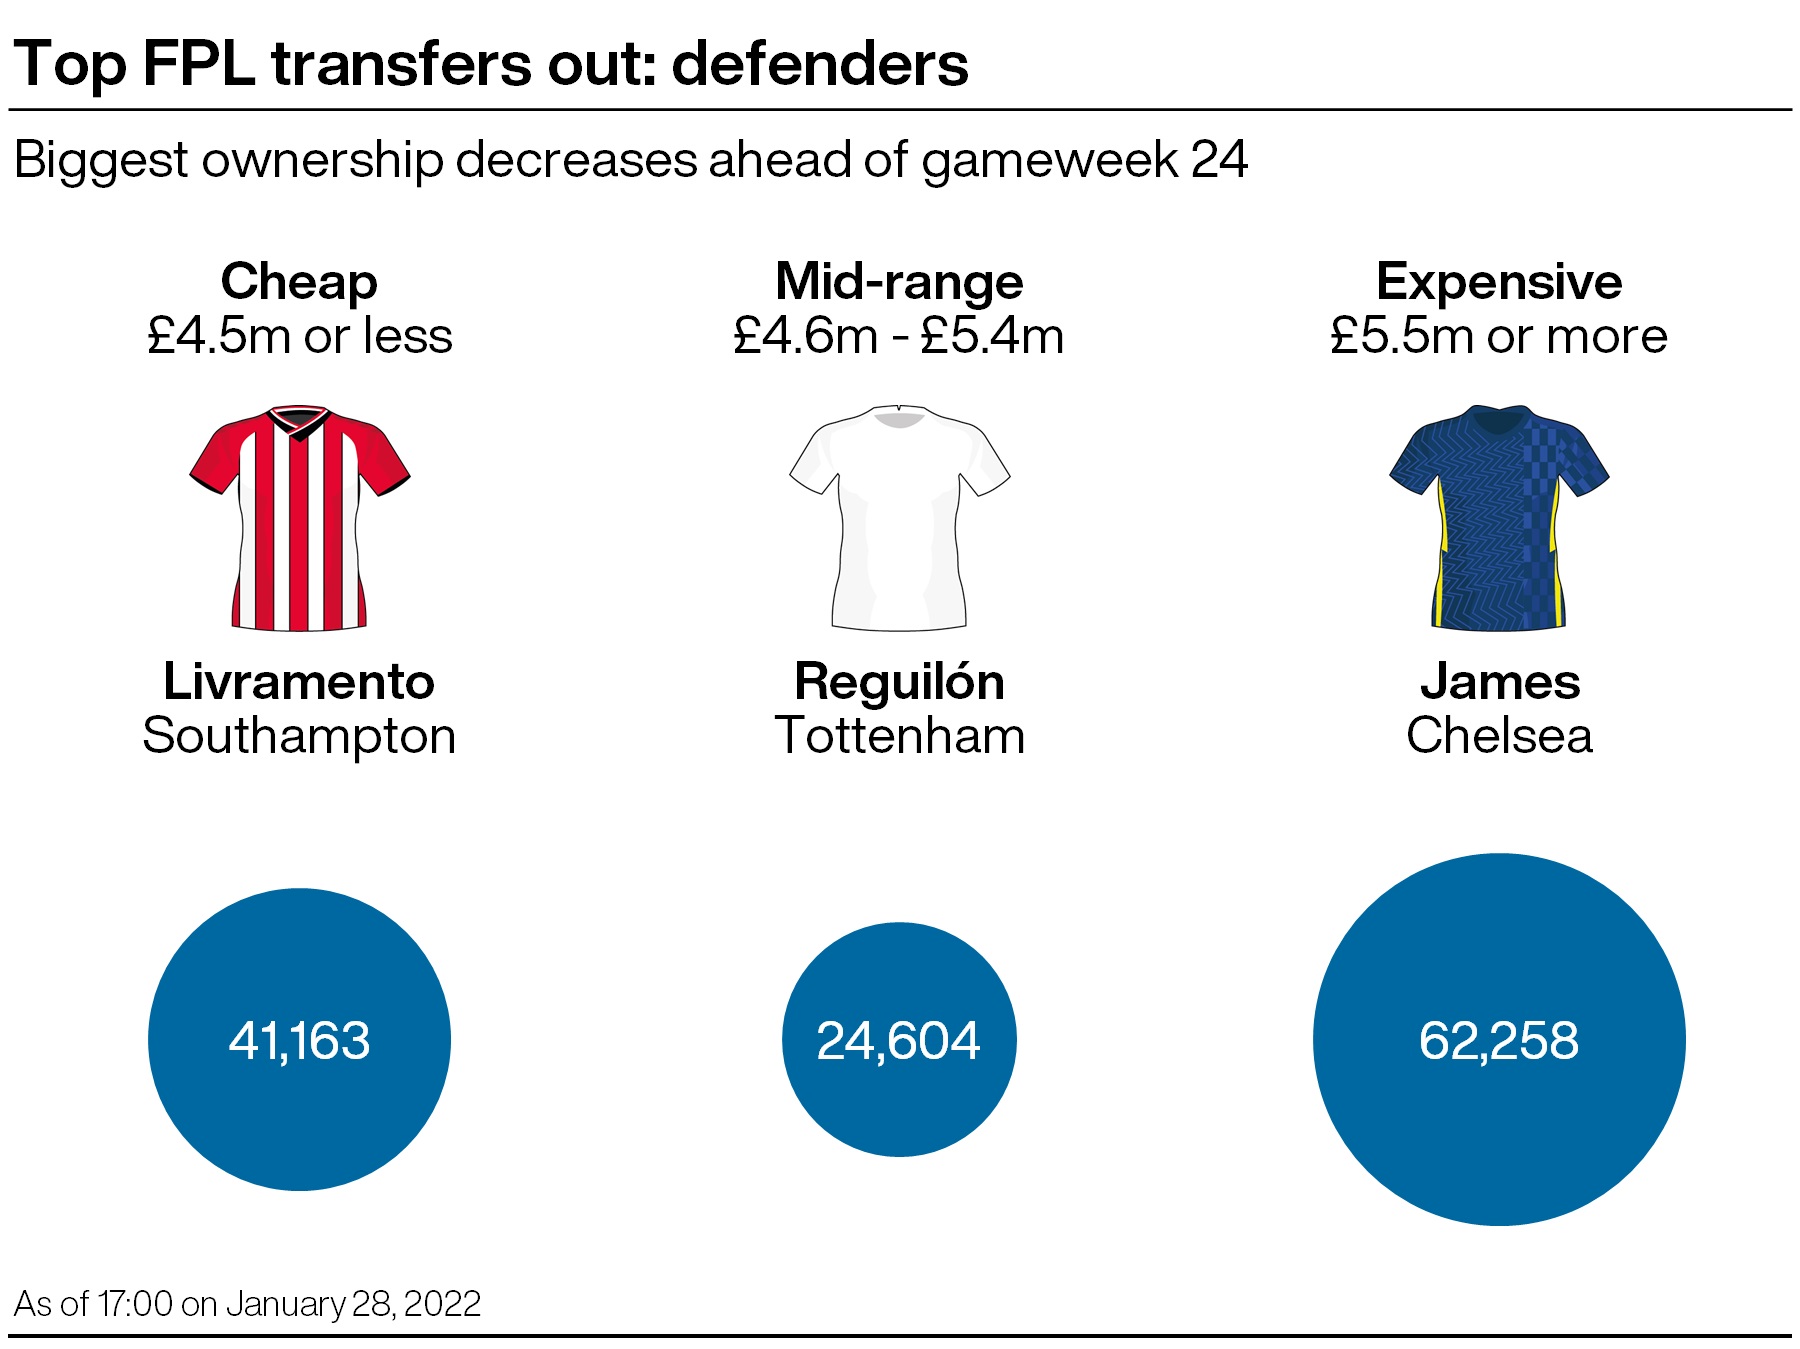 A graphic showing some of the most transferred players in the Fantasy Premier League ahead of gameweek 24